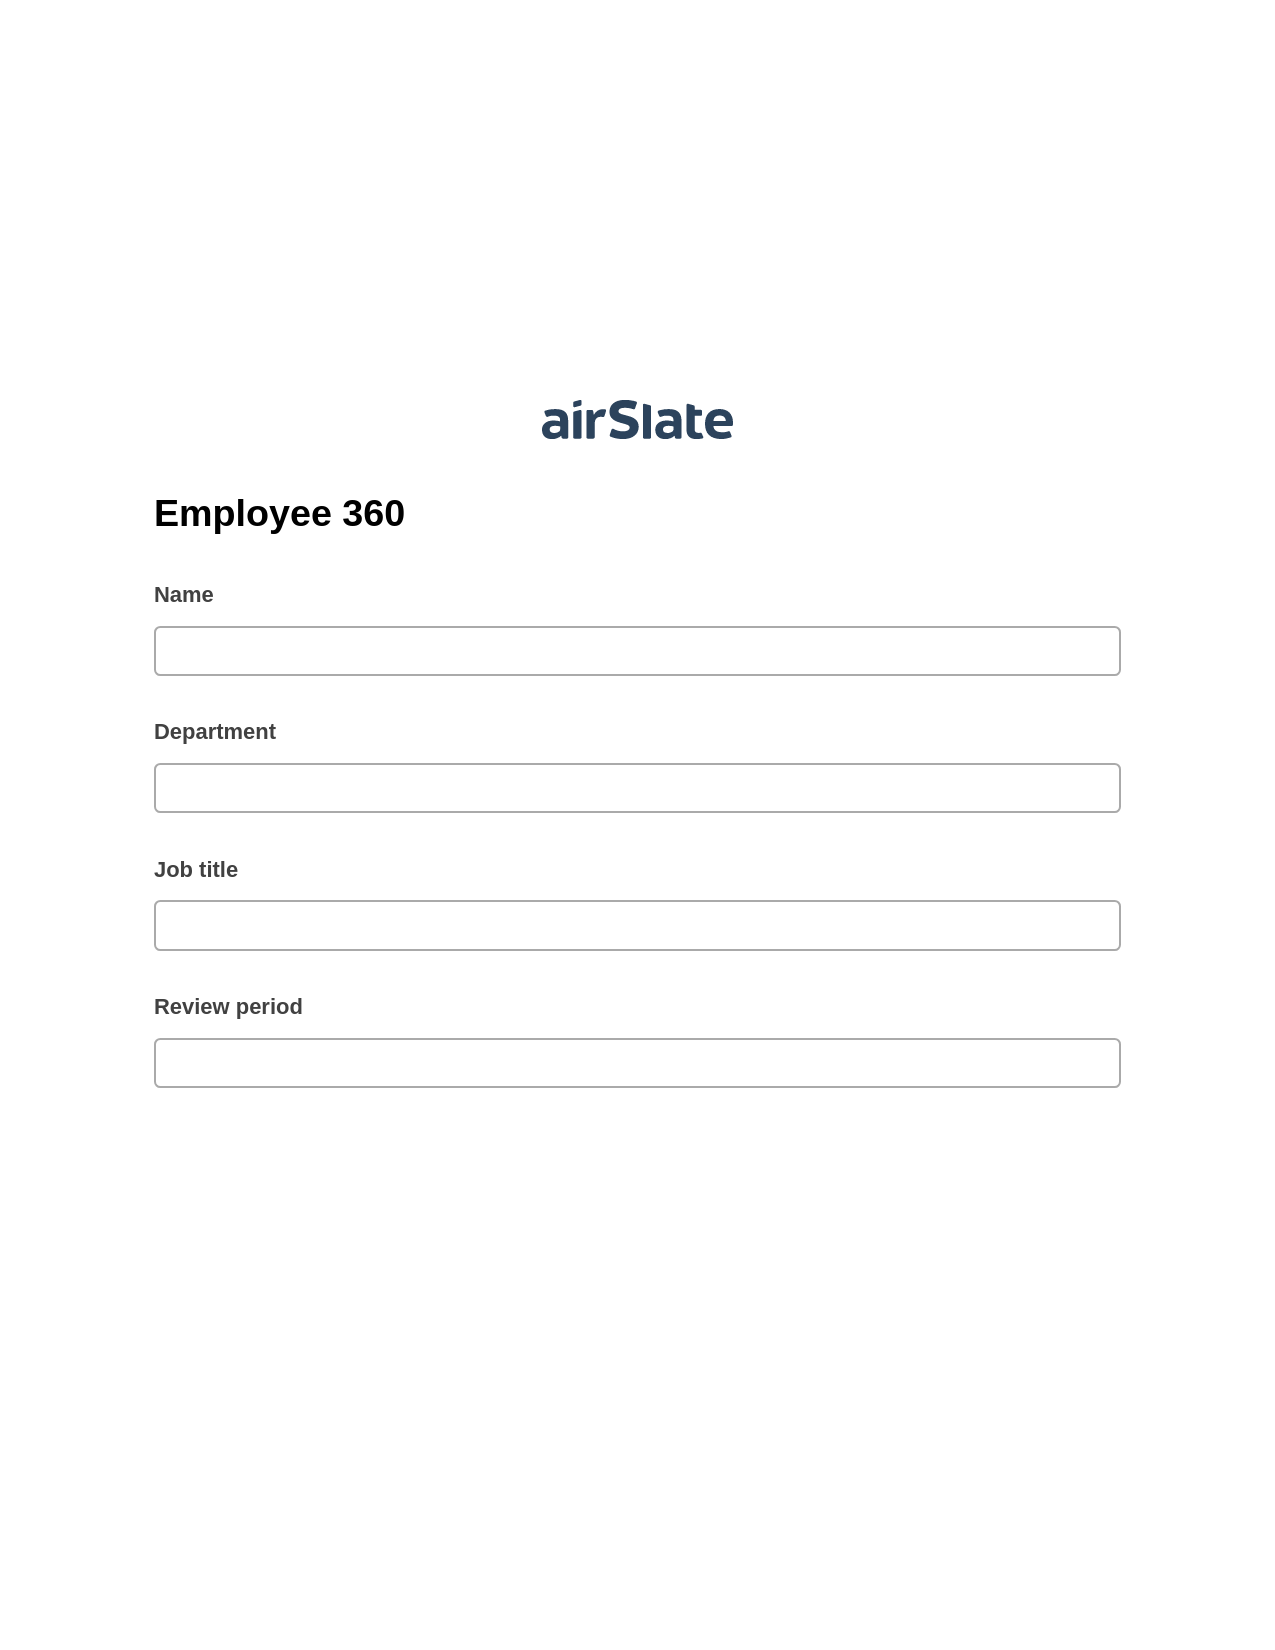 Employee 360 Pre-fill Document Bot, Hide Signatures Bot, Archive to SharePoint Folder Bot